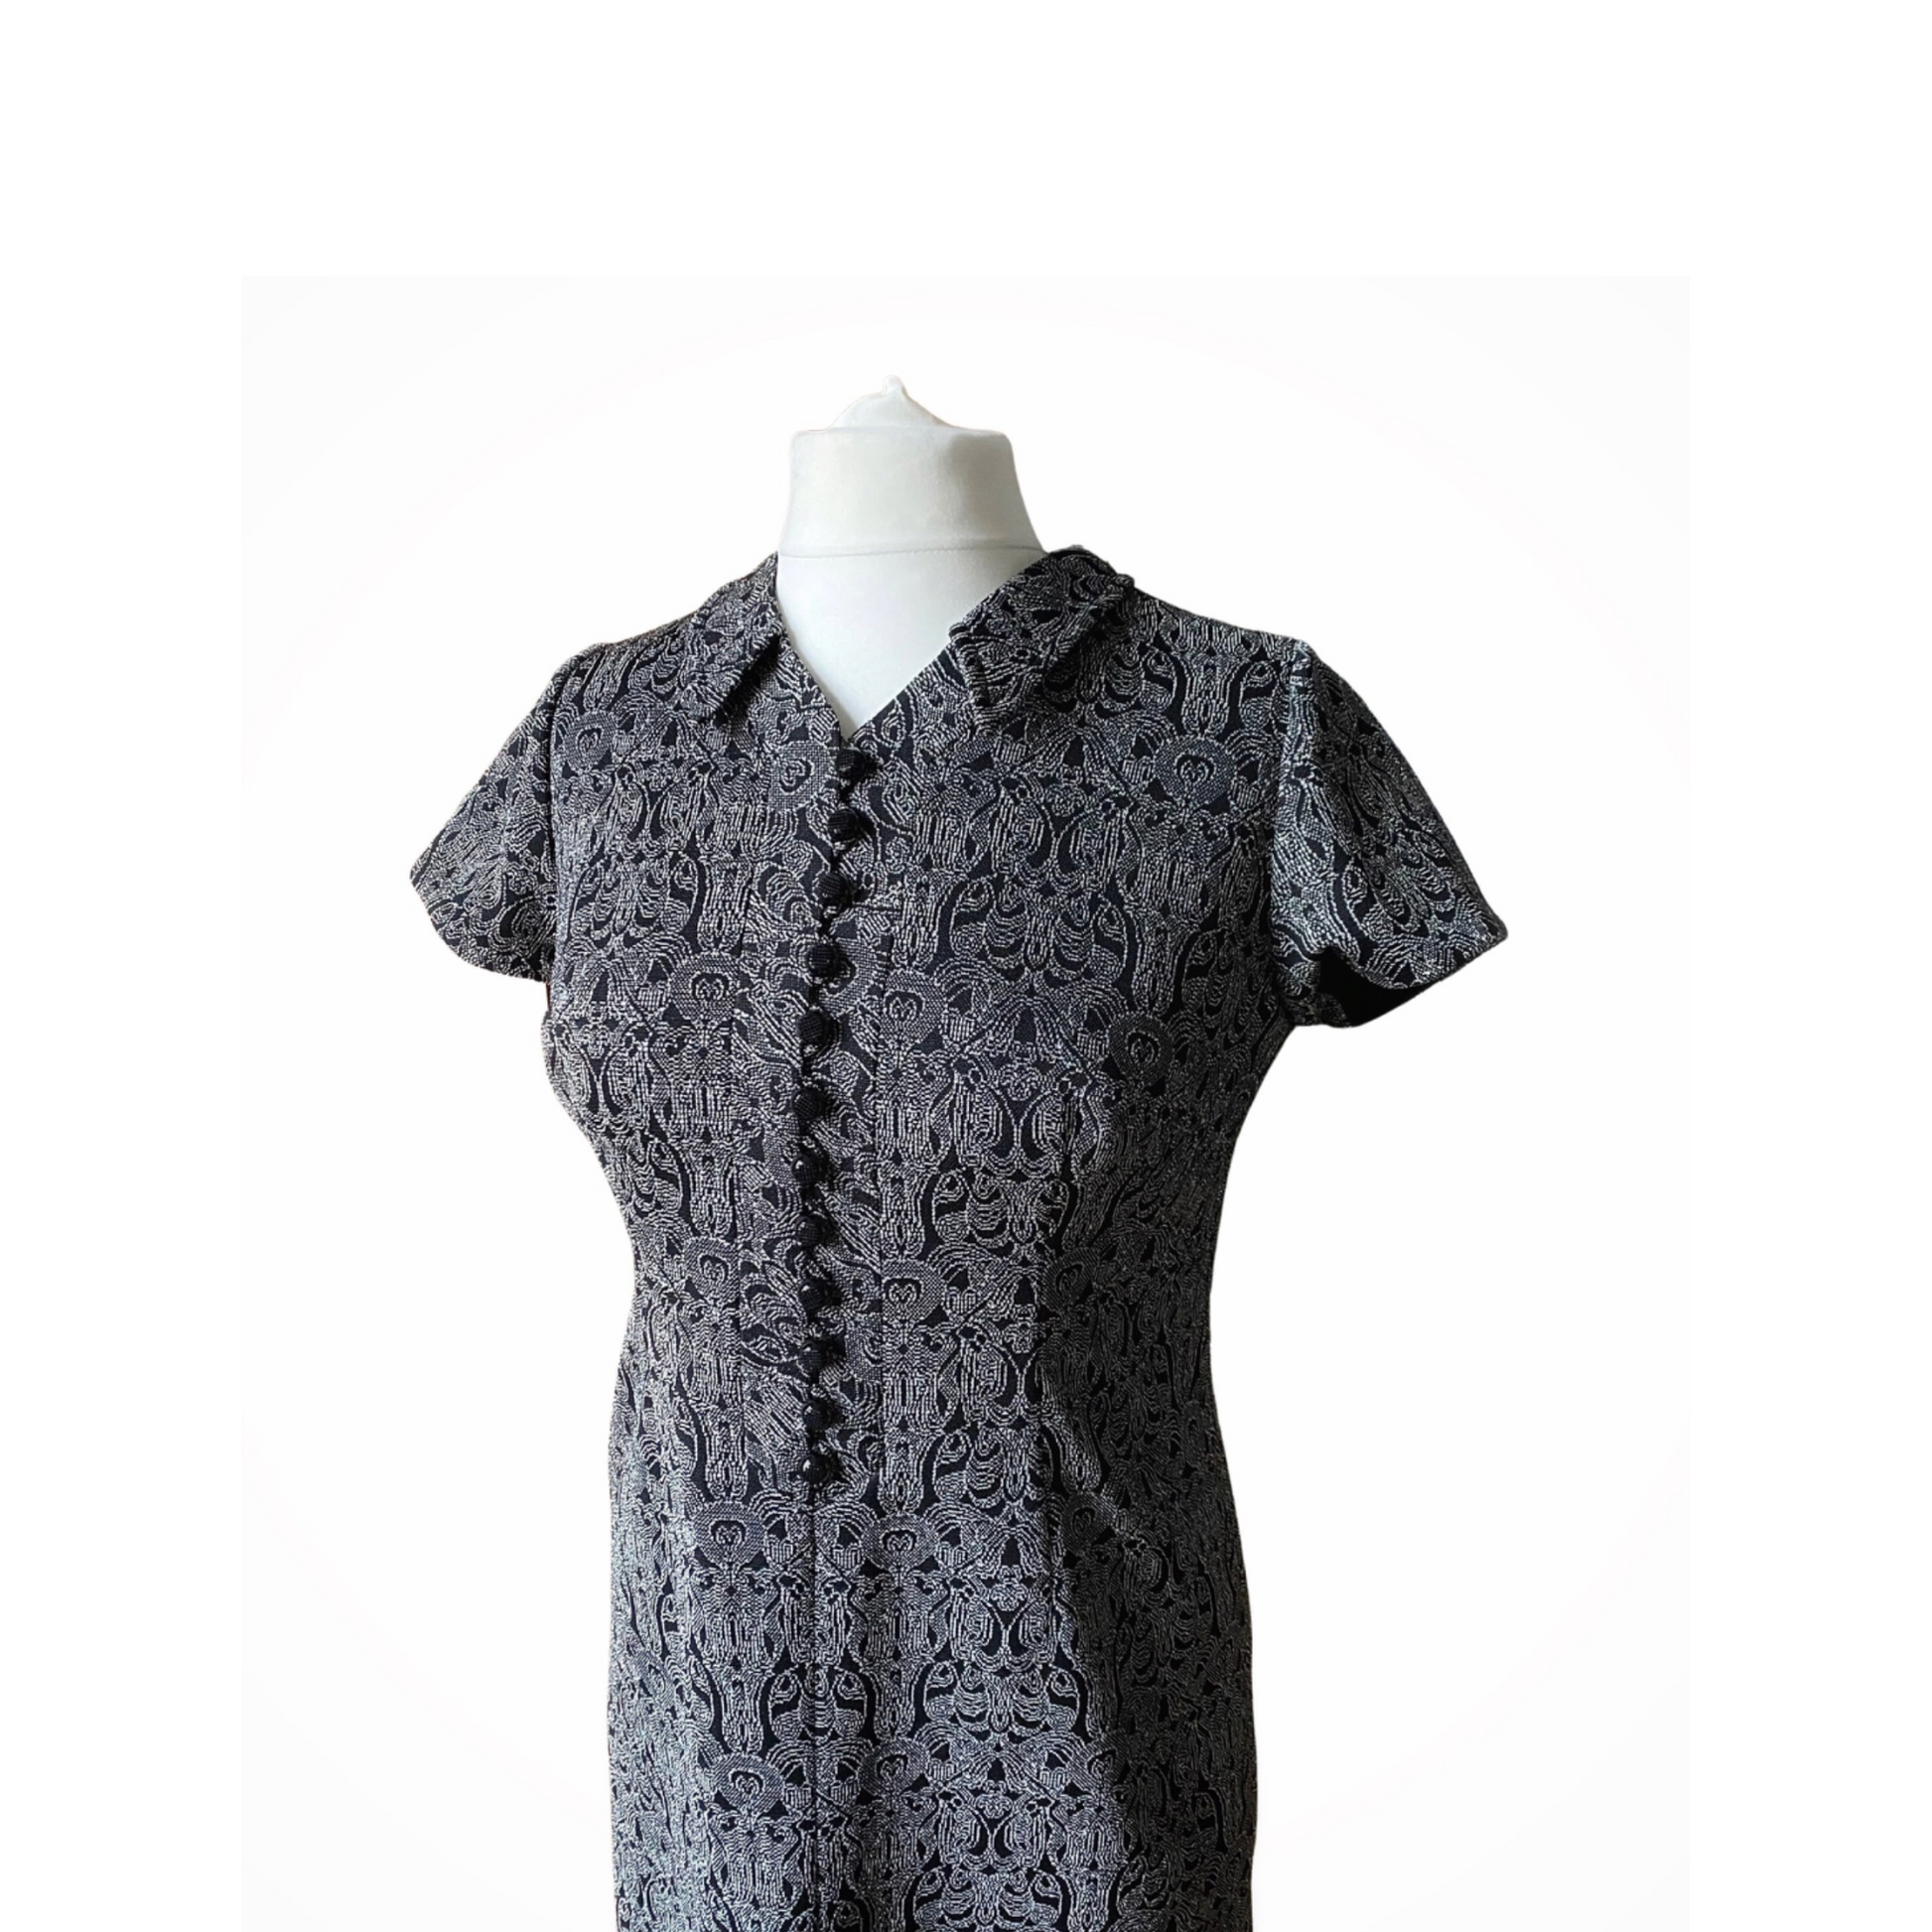 Vintage black button down Christmas party dress with silver art deco print